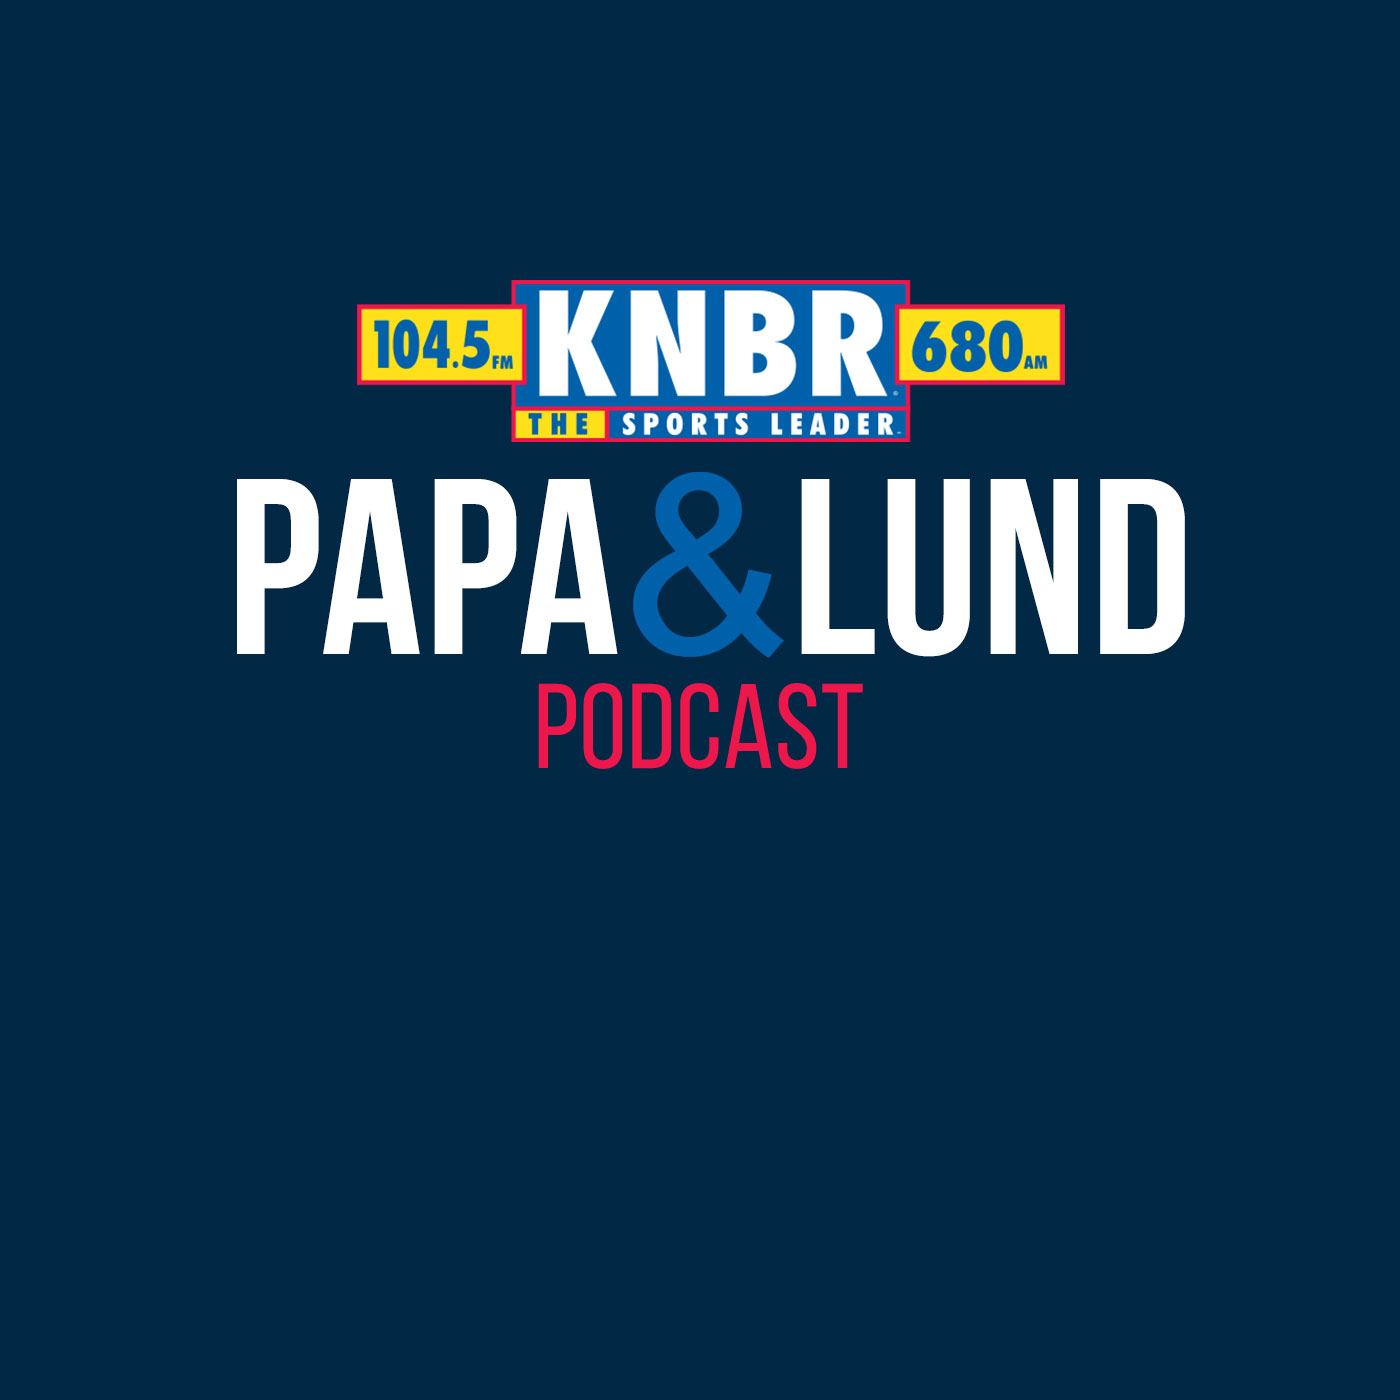 6-17 Mike Breen joins Papa & Lund to wrap up the NBA Finals and discuss the legacy of Steph Curry after winning his first Finals MVP